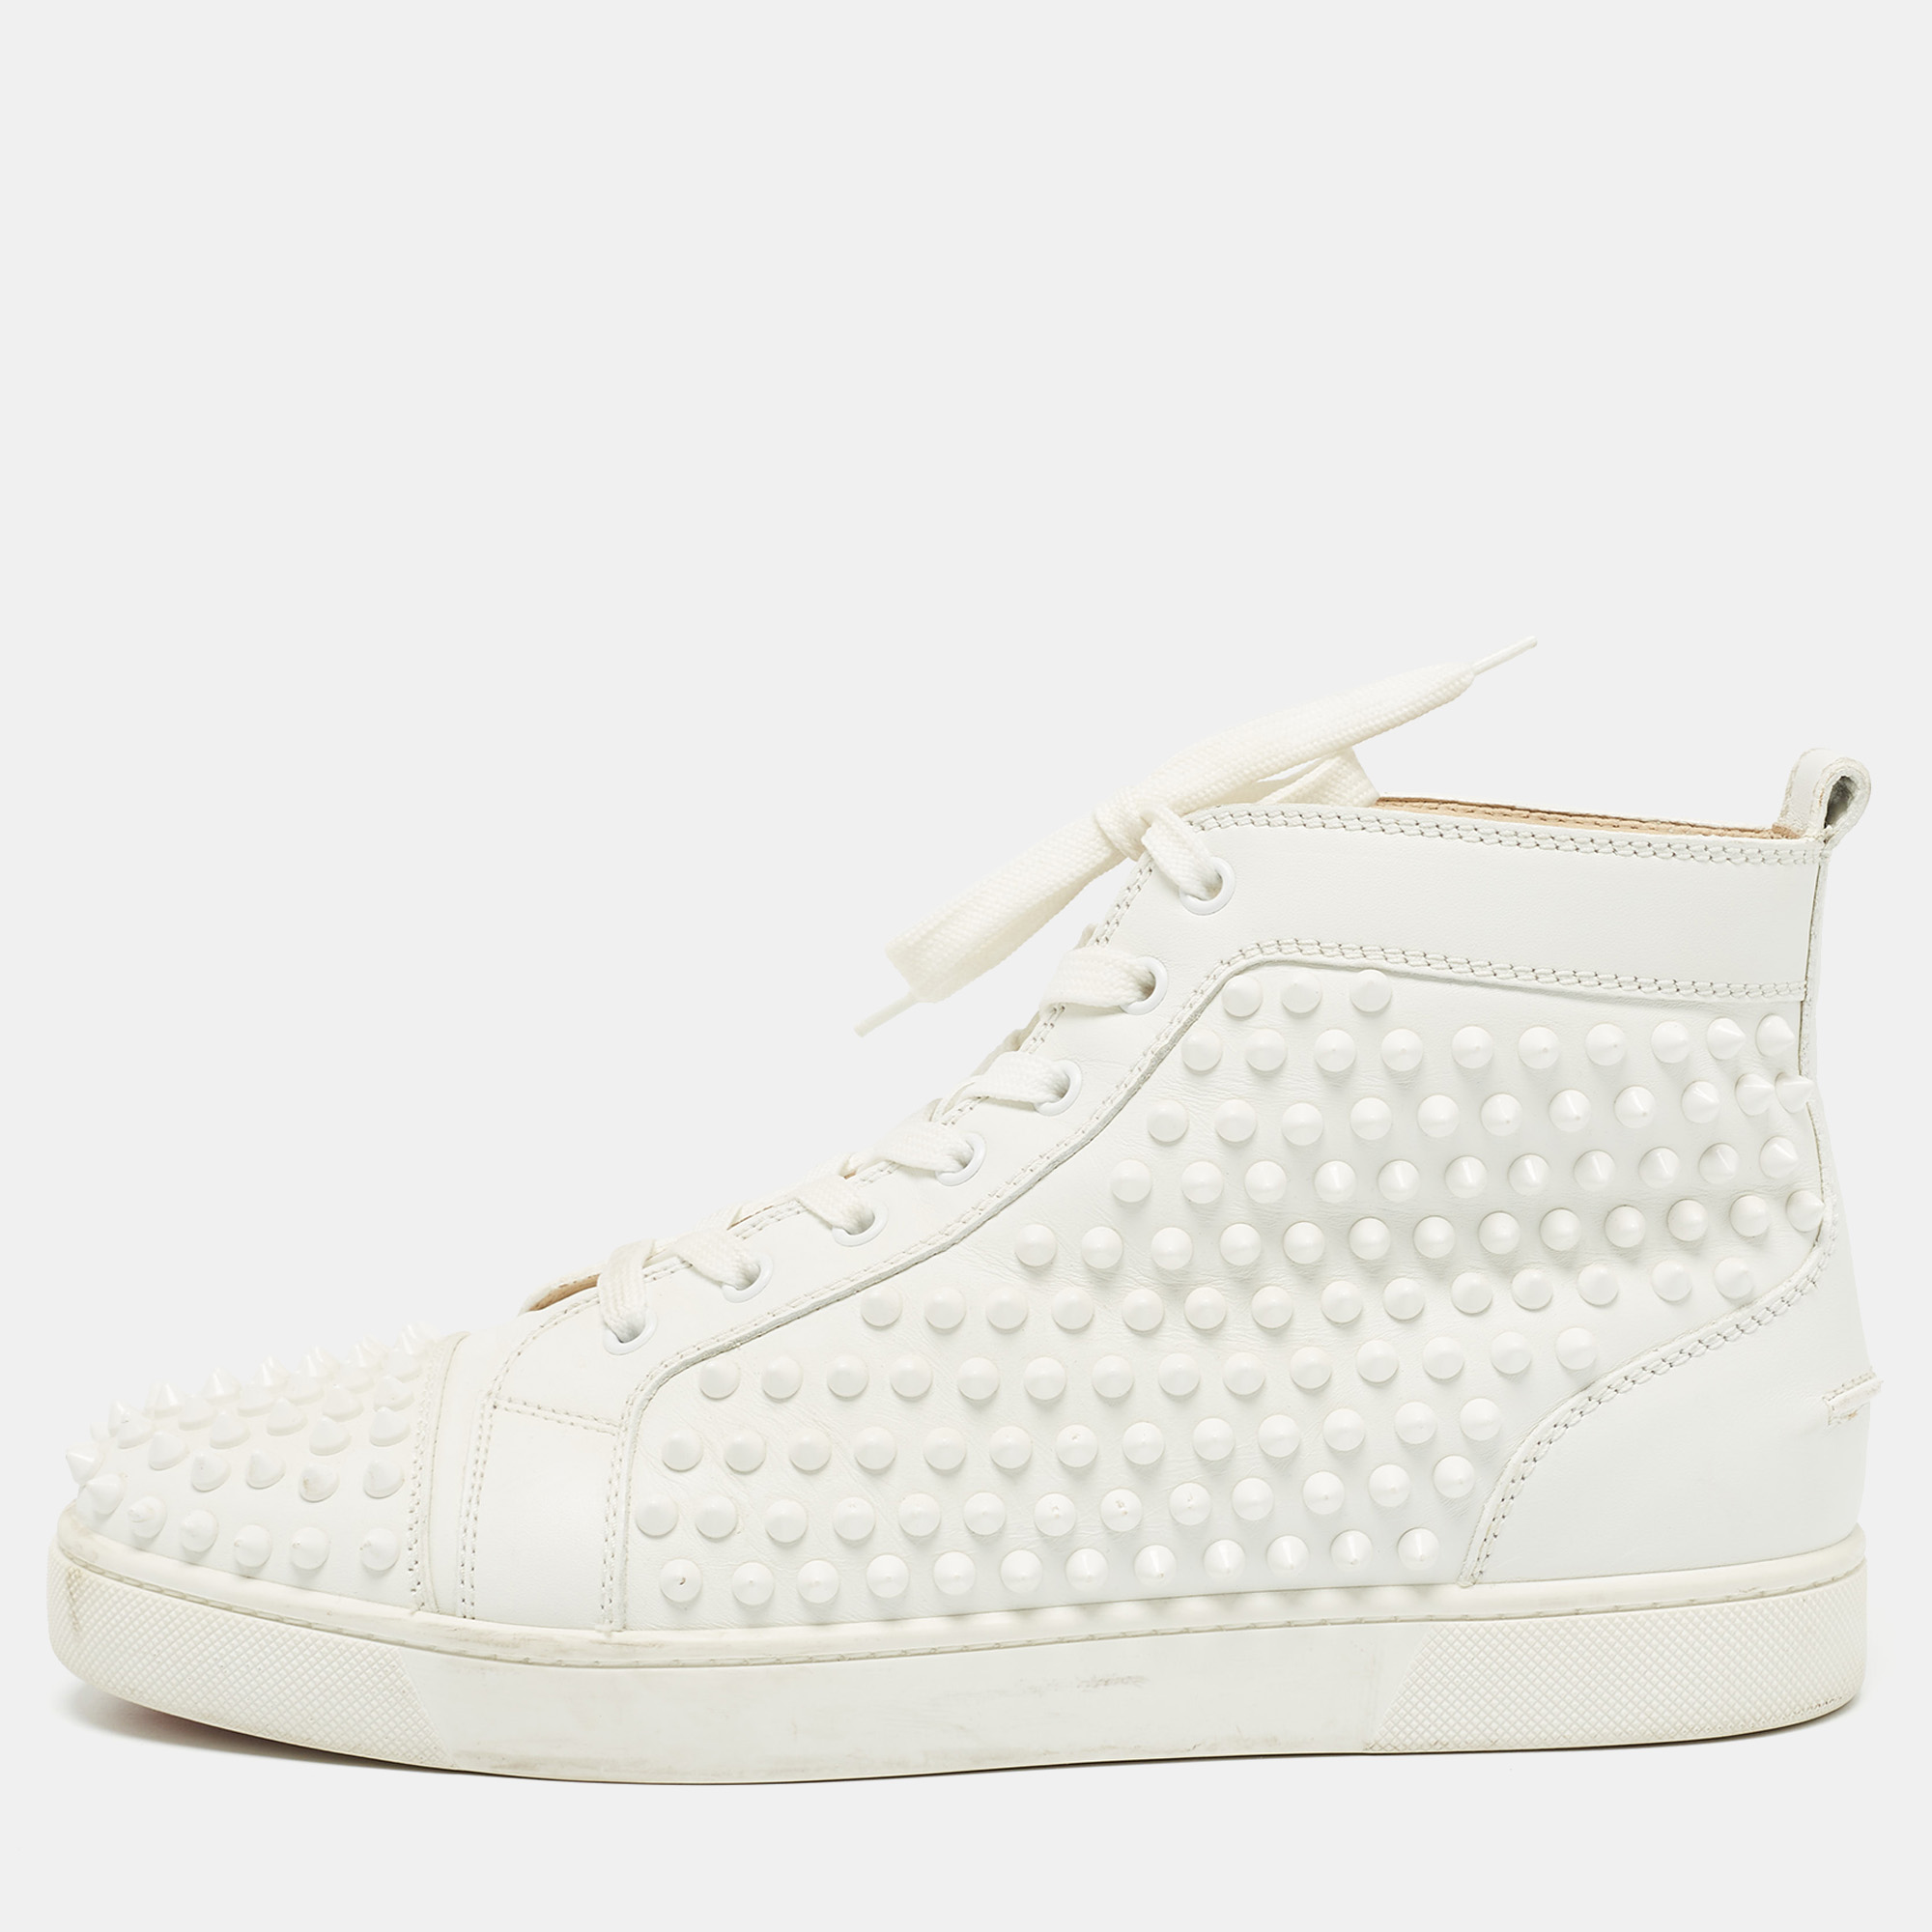 Christian louboutin white leather louis spikes high top sneakers size 42.5